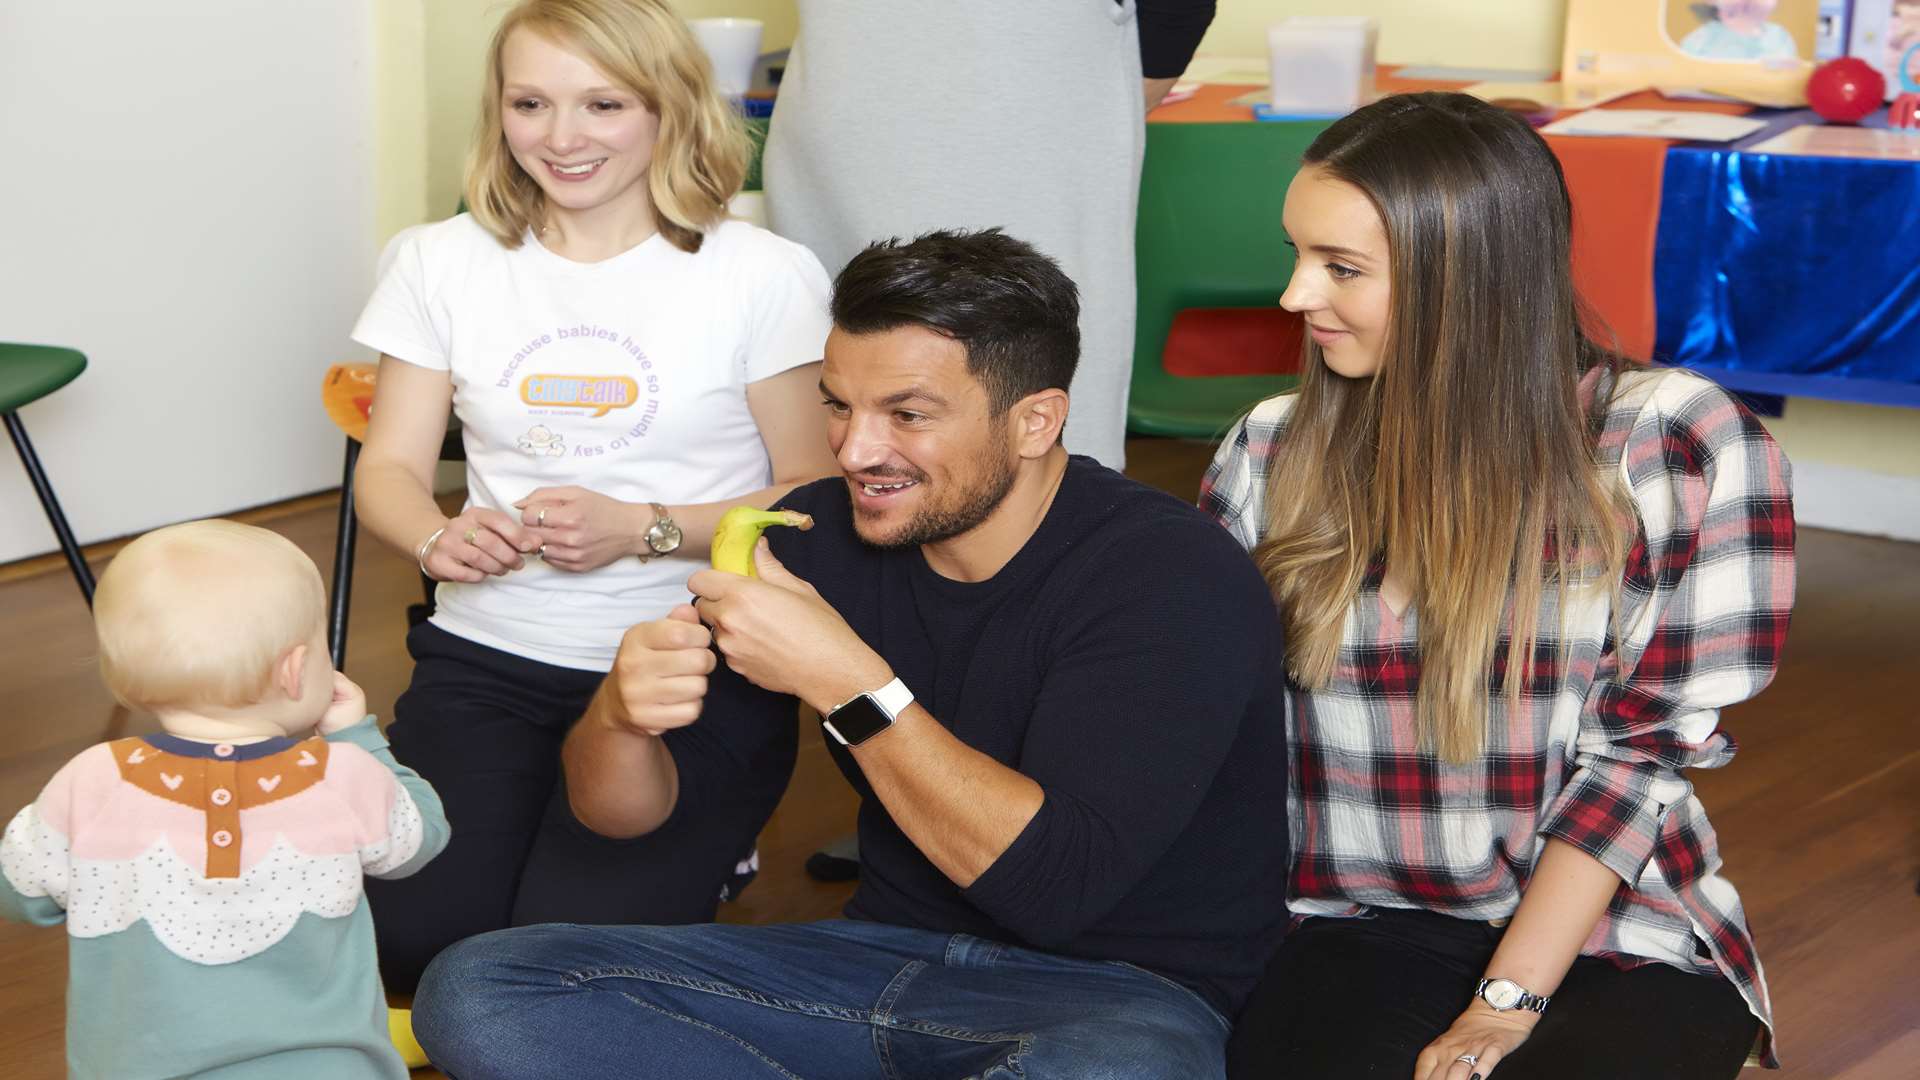 Peter Andre tries out the new signing skills he learnt after meeting Rebecca Oakley. Picture: npower